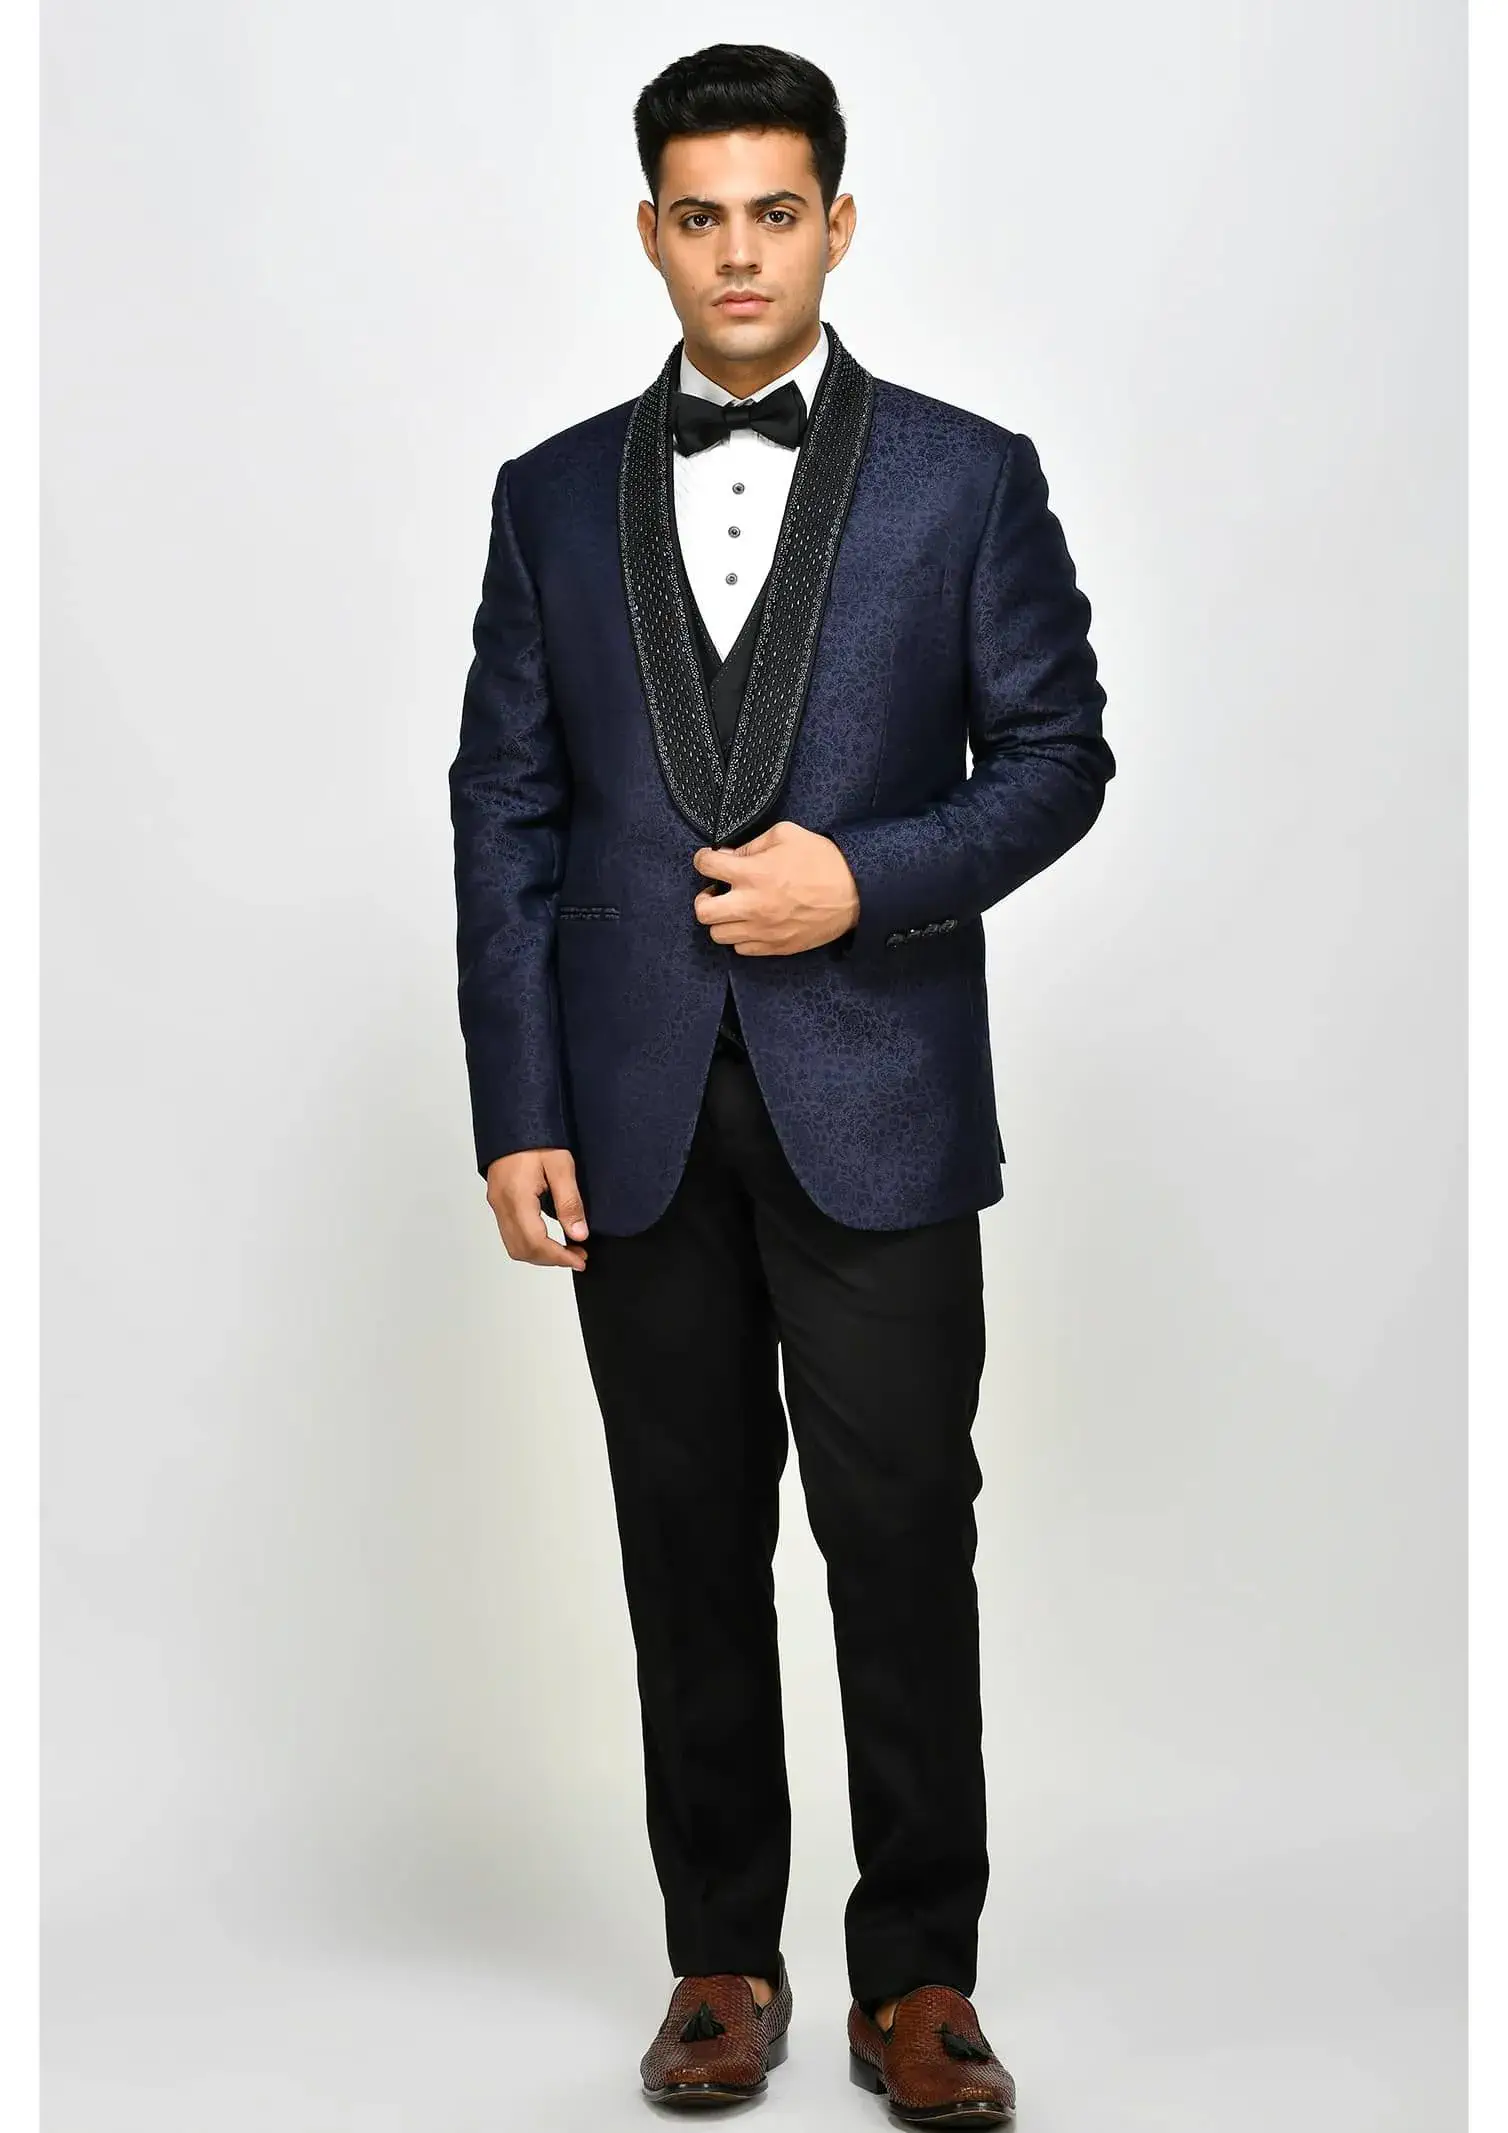 Pin on Contemporary Wedding Suits